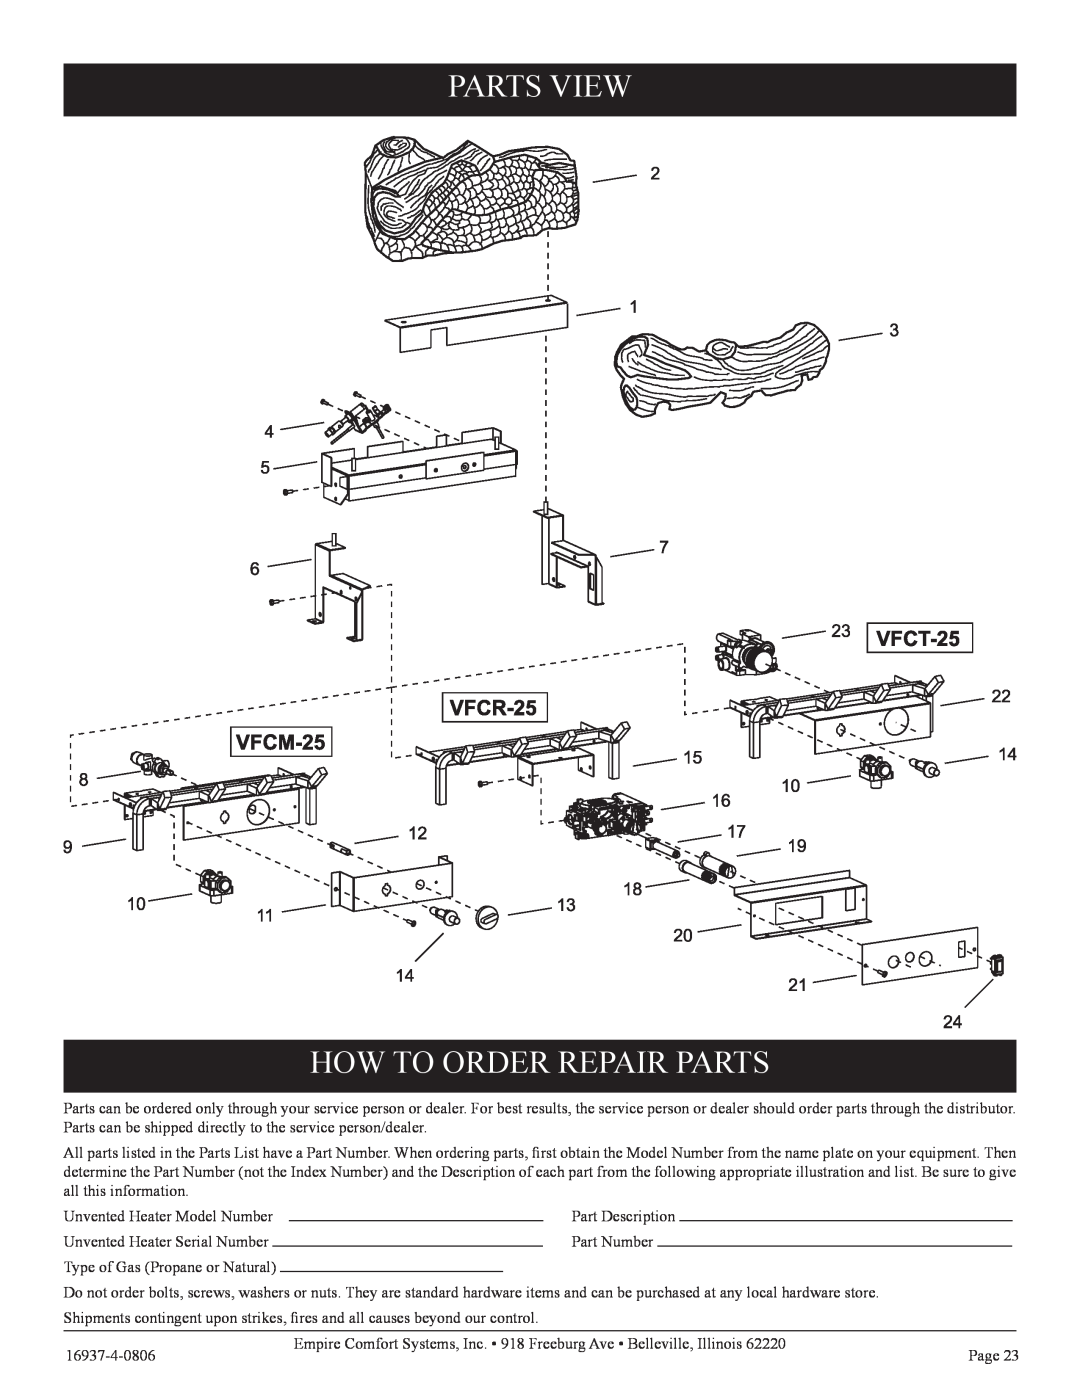 Empire Comfort Systems VFCM-25-3. VFCR-25-3, VFCT25-3 installation instructions Parts View How To Order Repair Parts 